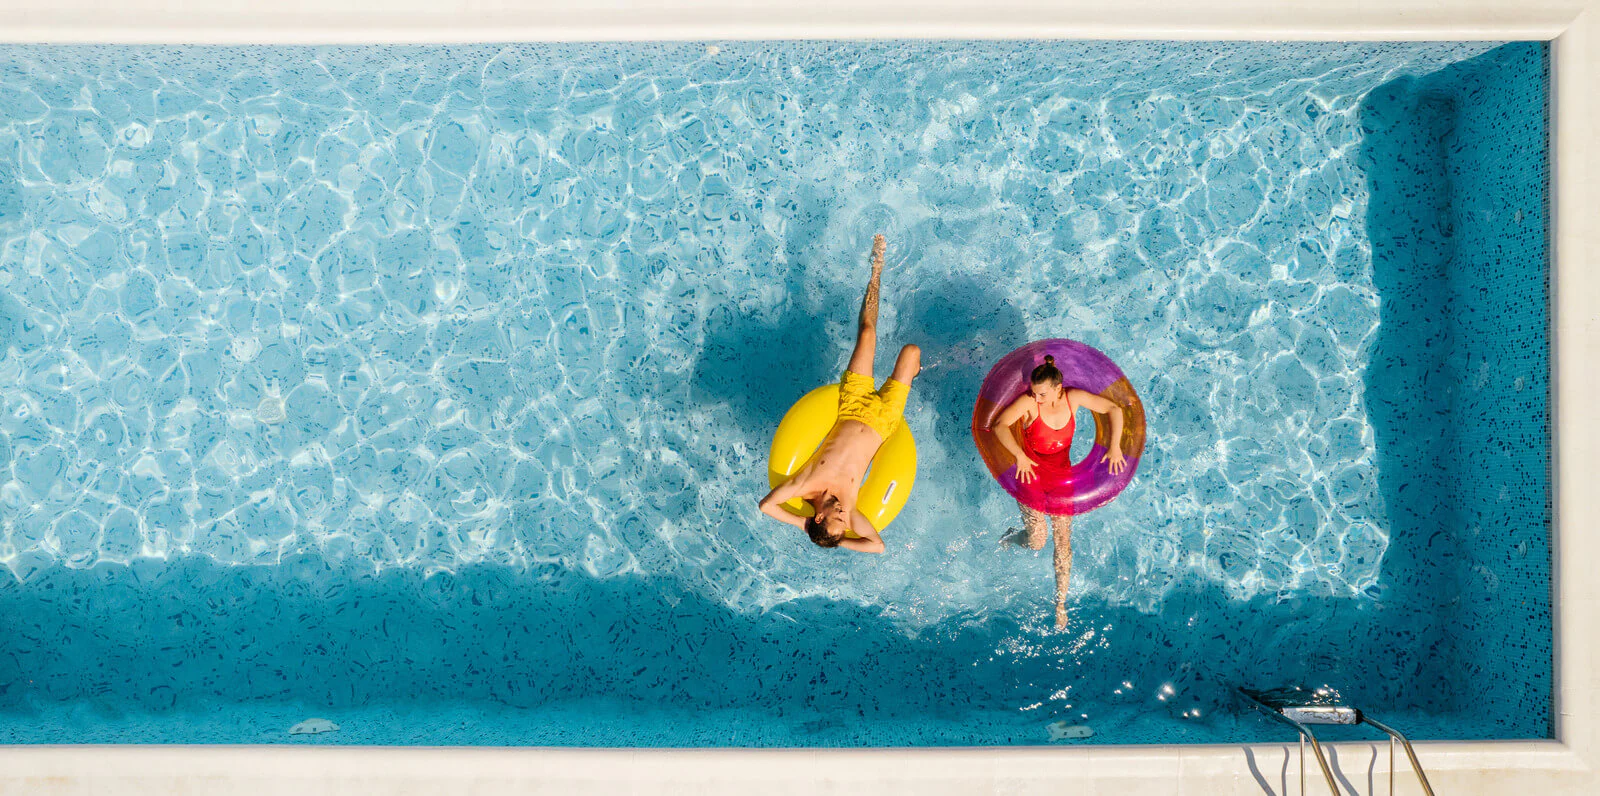 Two people, a man and a woman, floating on inflatable rings in a pool. The man wears yellow trunks on a yellow ring, while the woman wears a red bathing suit on a red ring